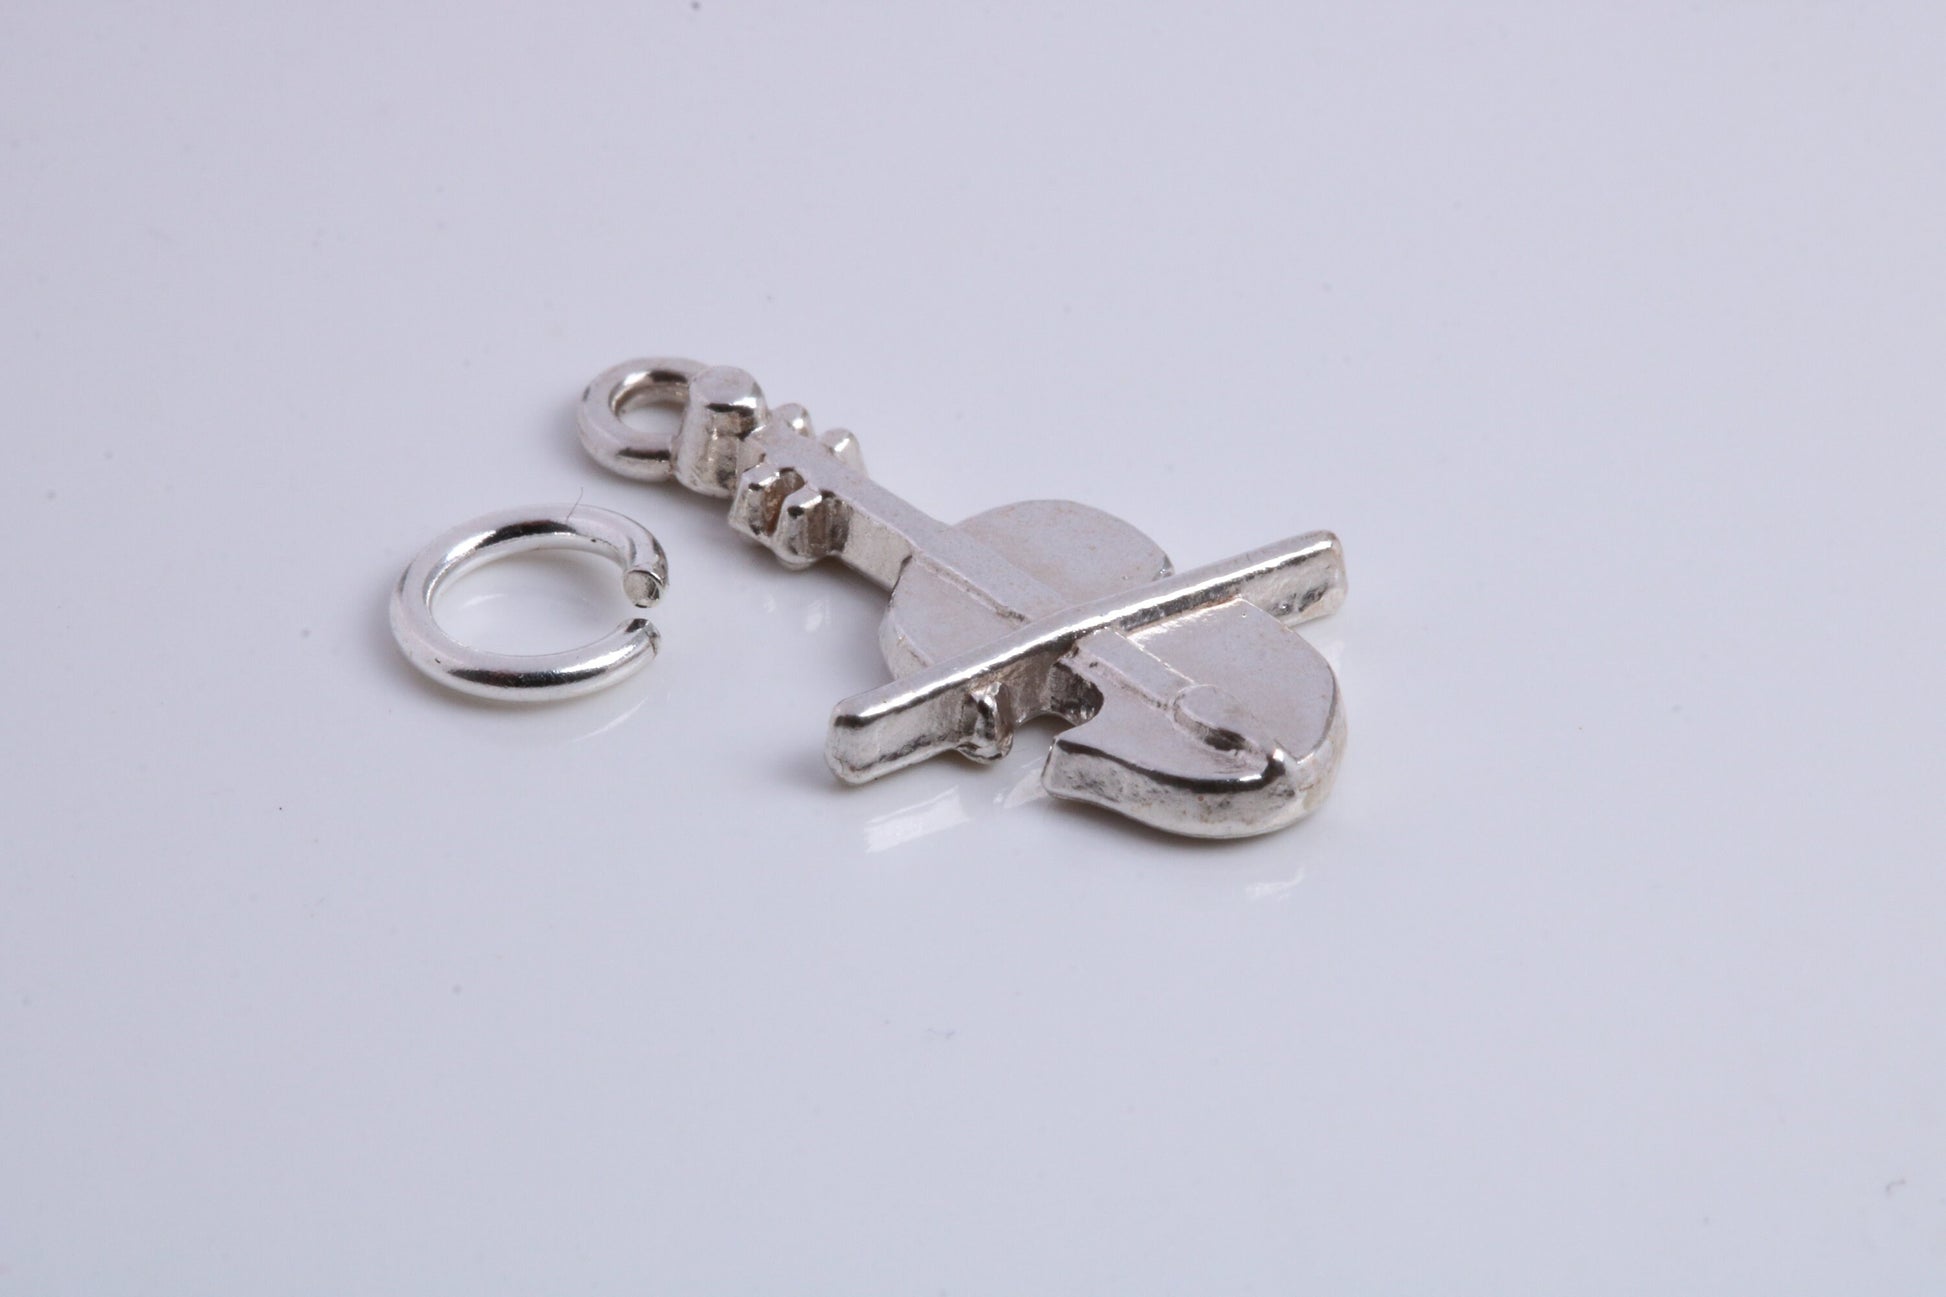 Violin Charm, Traditional Charm, Made from Solid 925 Grade Sterling Silver, Complete with Attachment Link